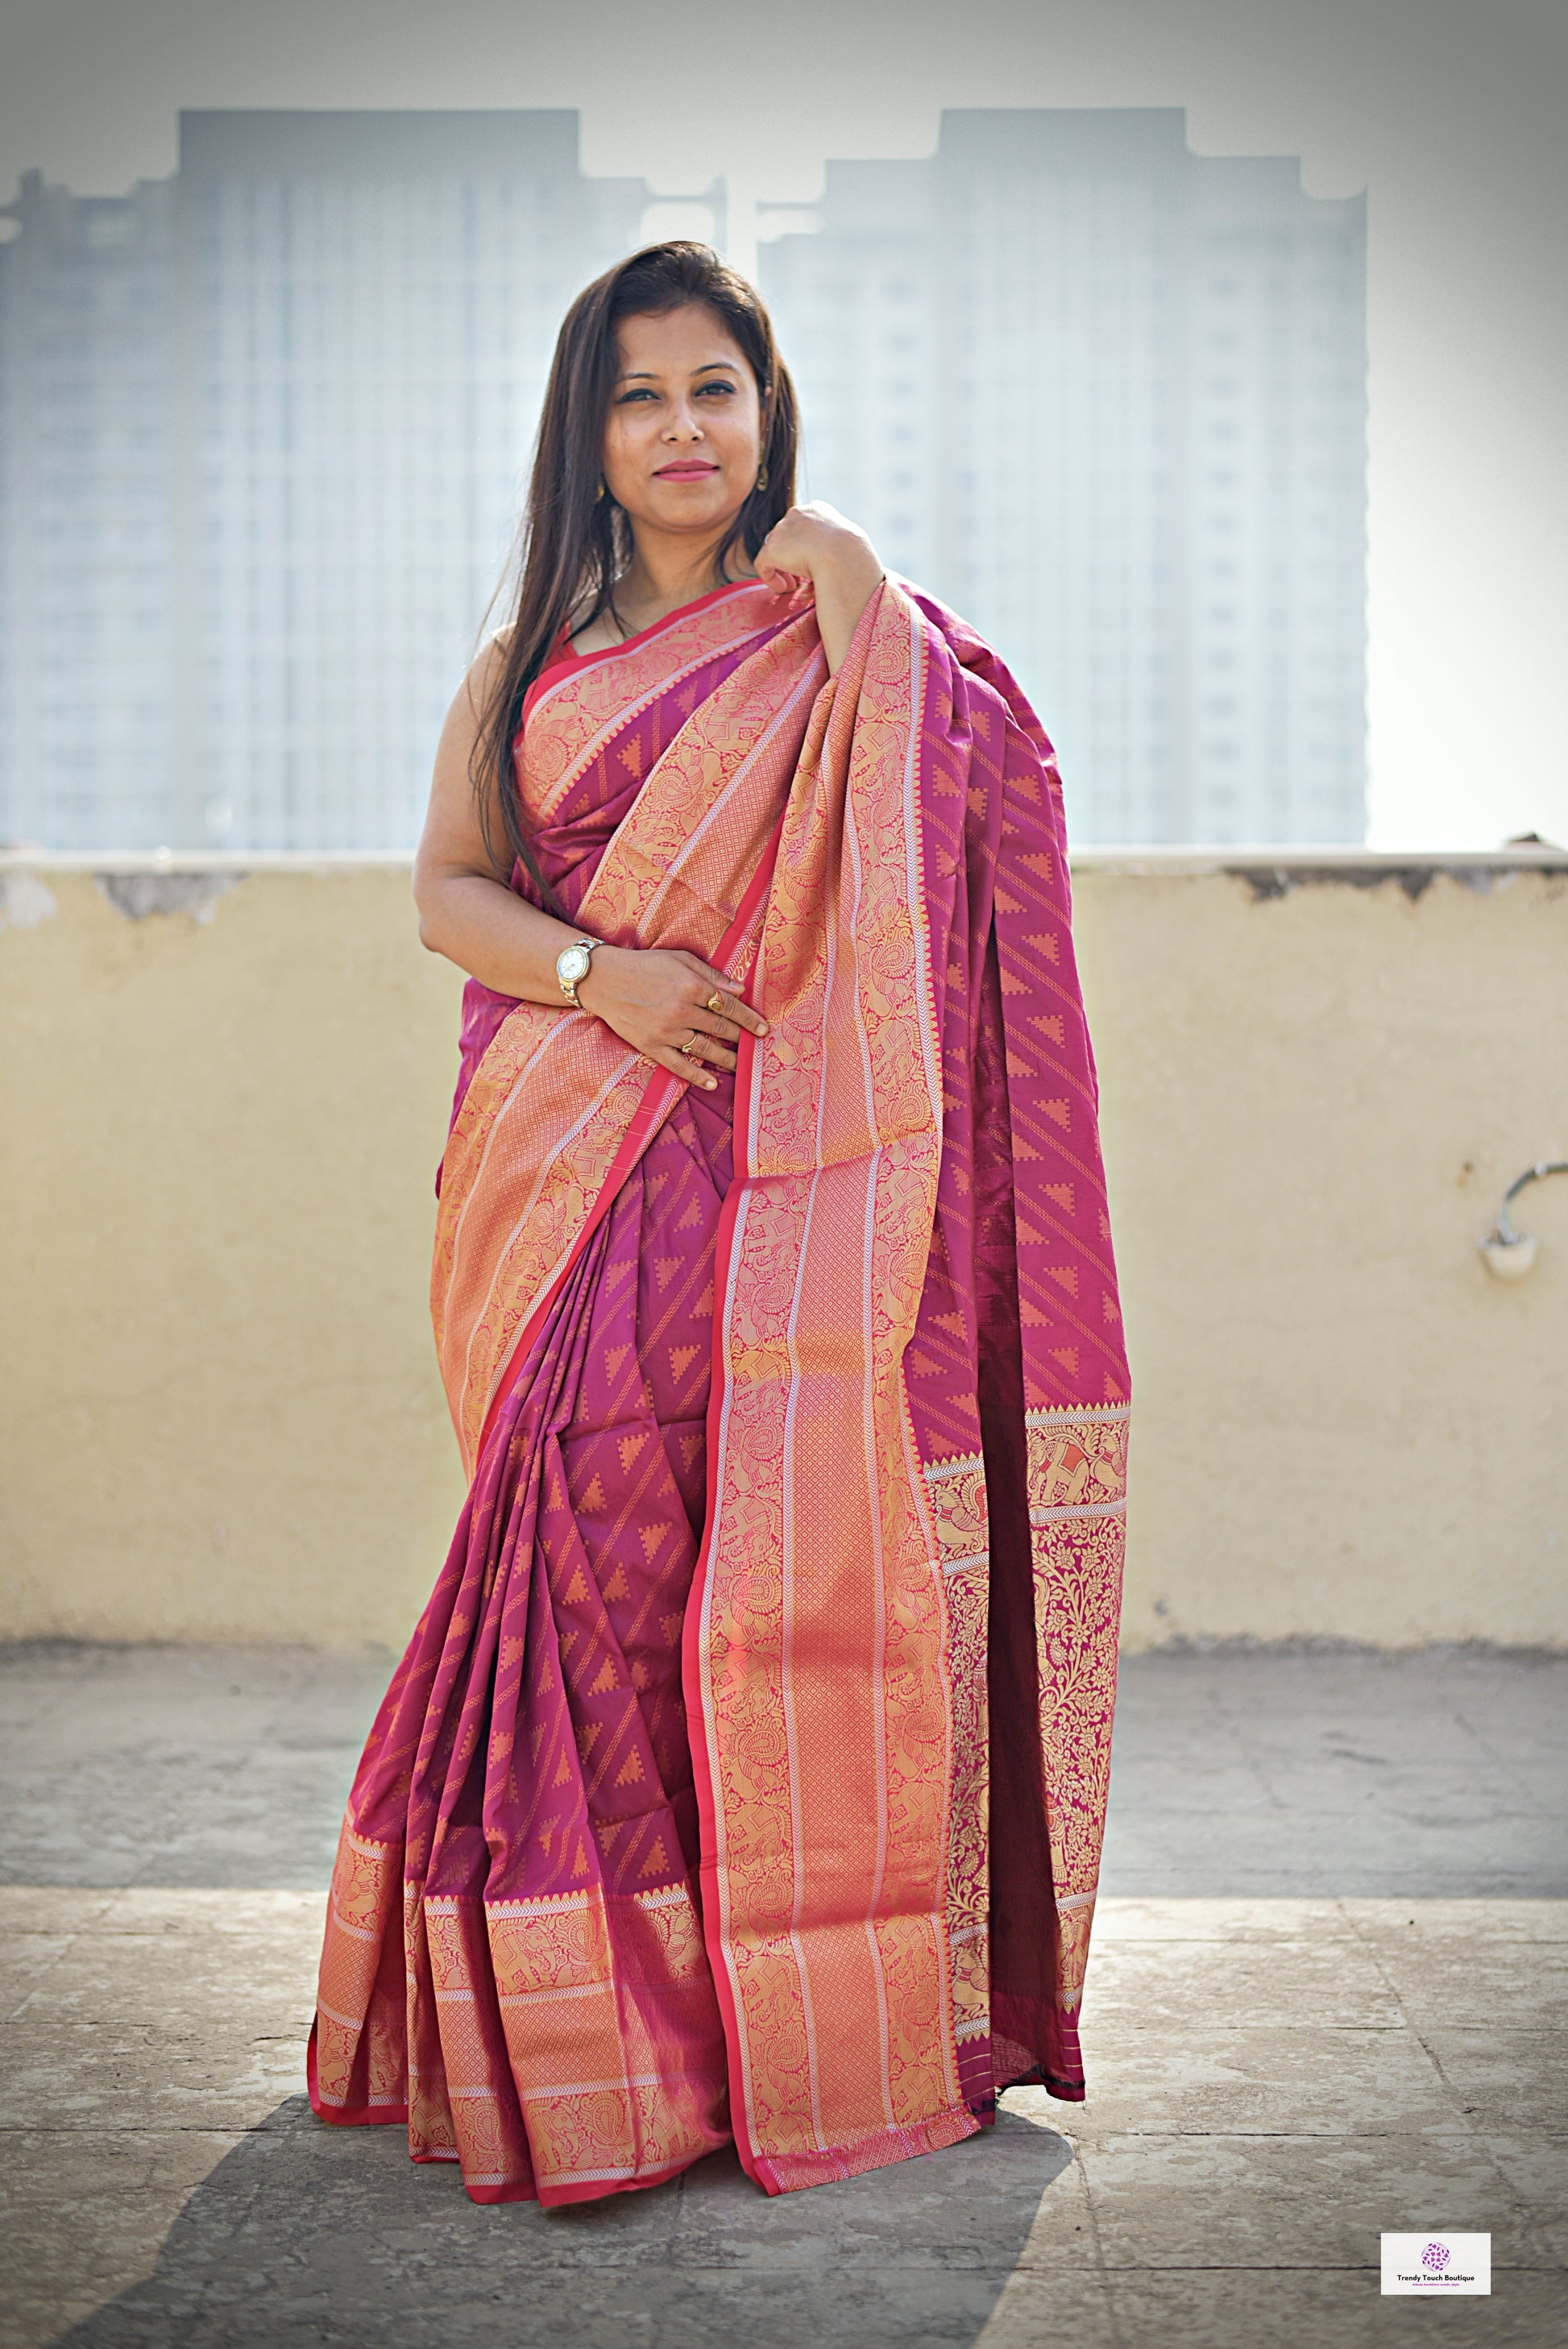 Kanjivaram styled pink copper zari work party wear special occasion saree for wedding function or bridal gift